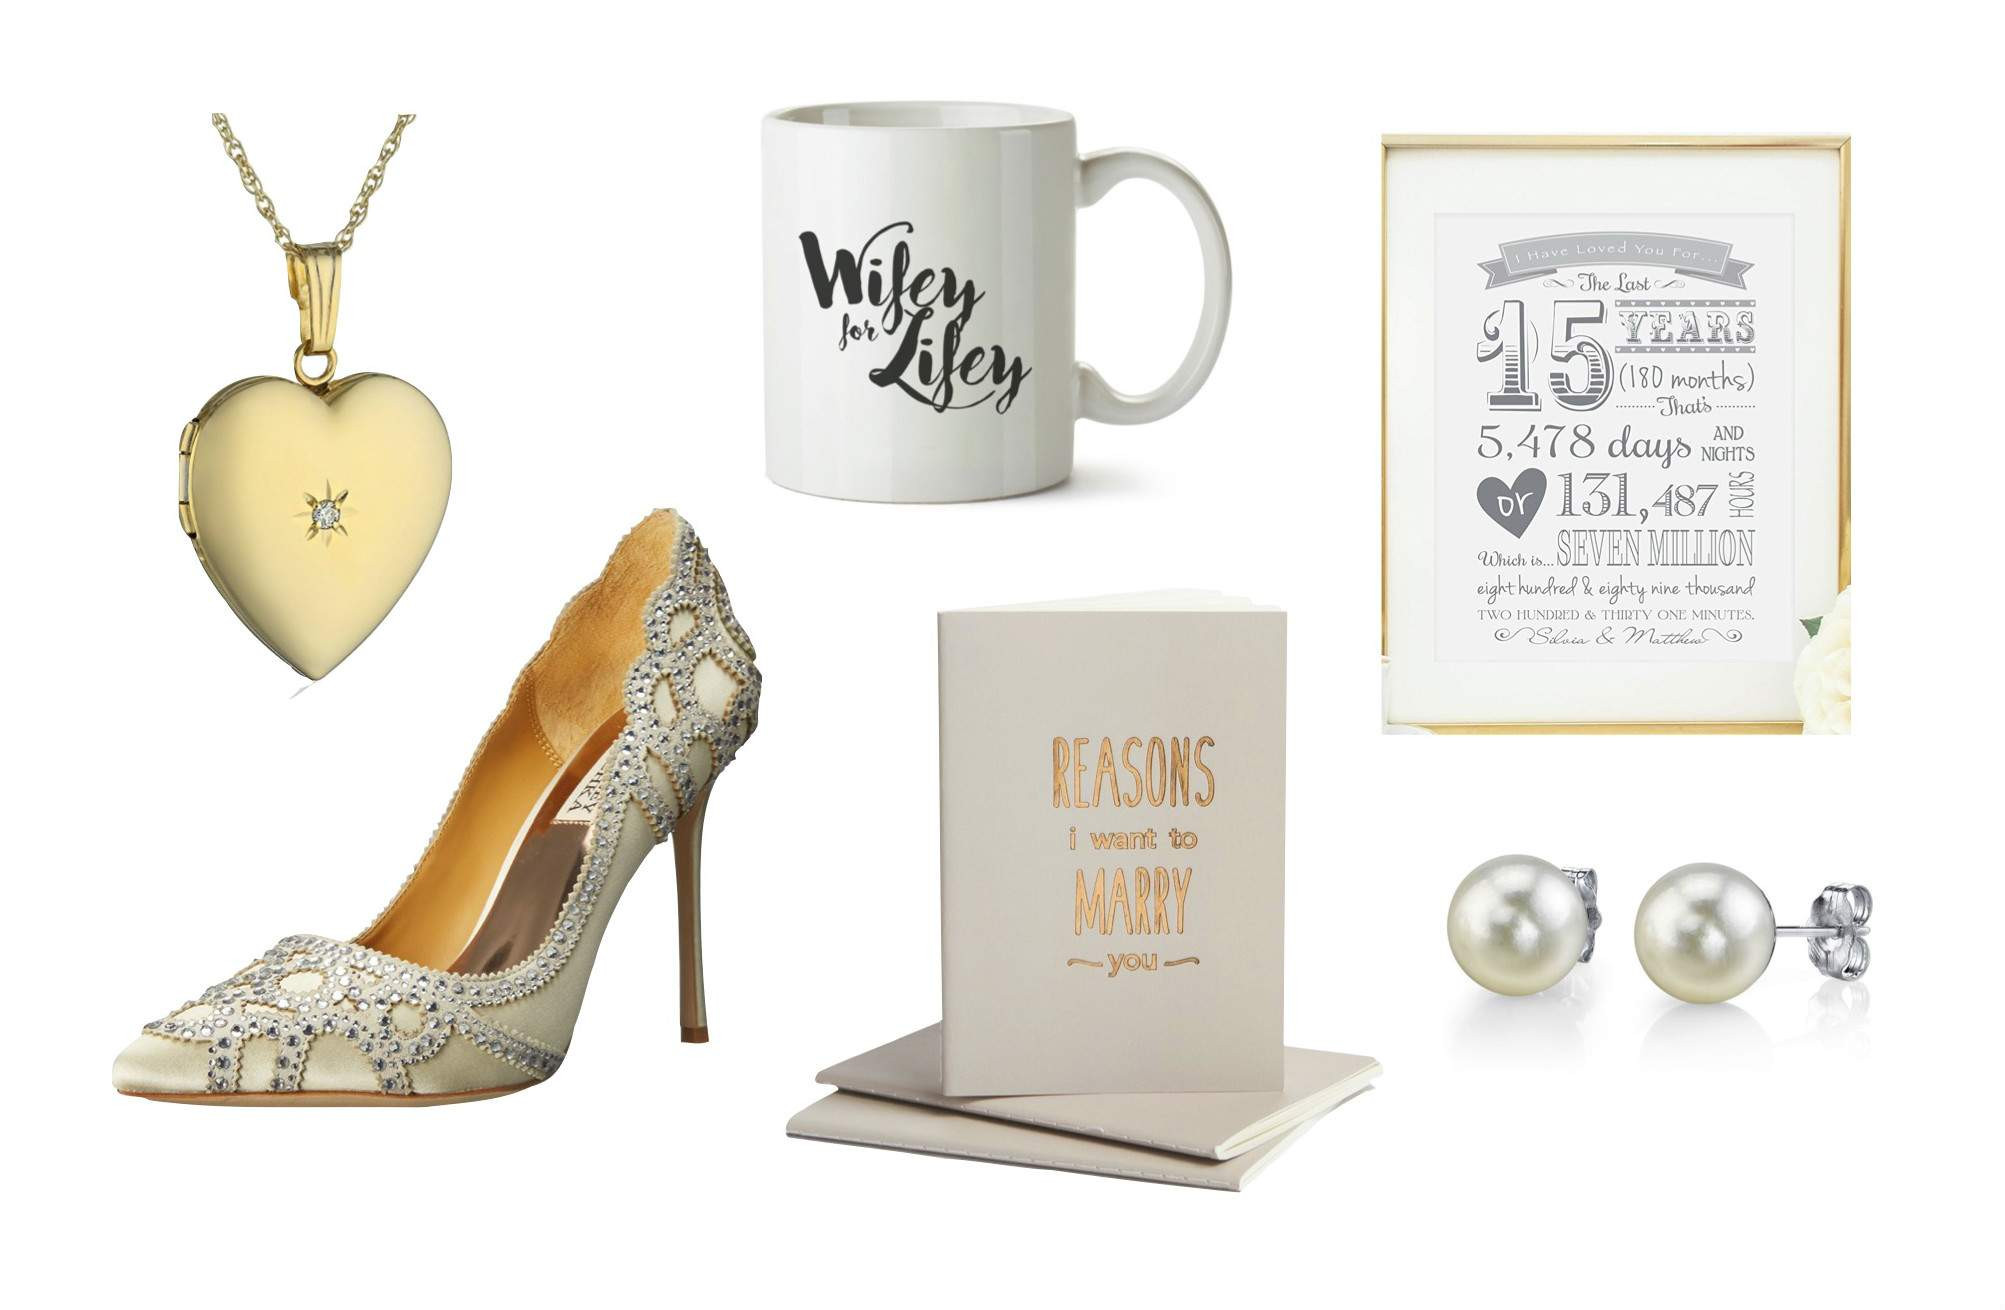 Wedding Gift Ideas For Groom From Bride
 Best Wedding Day Gift Ideas From the Groom to the Bride